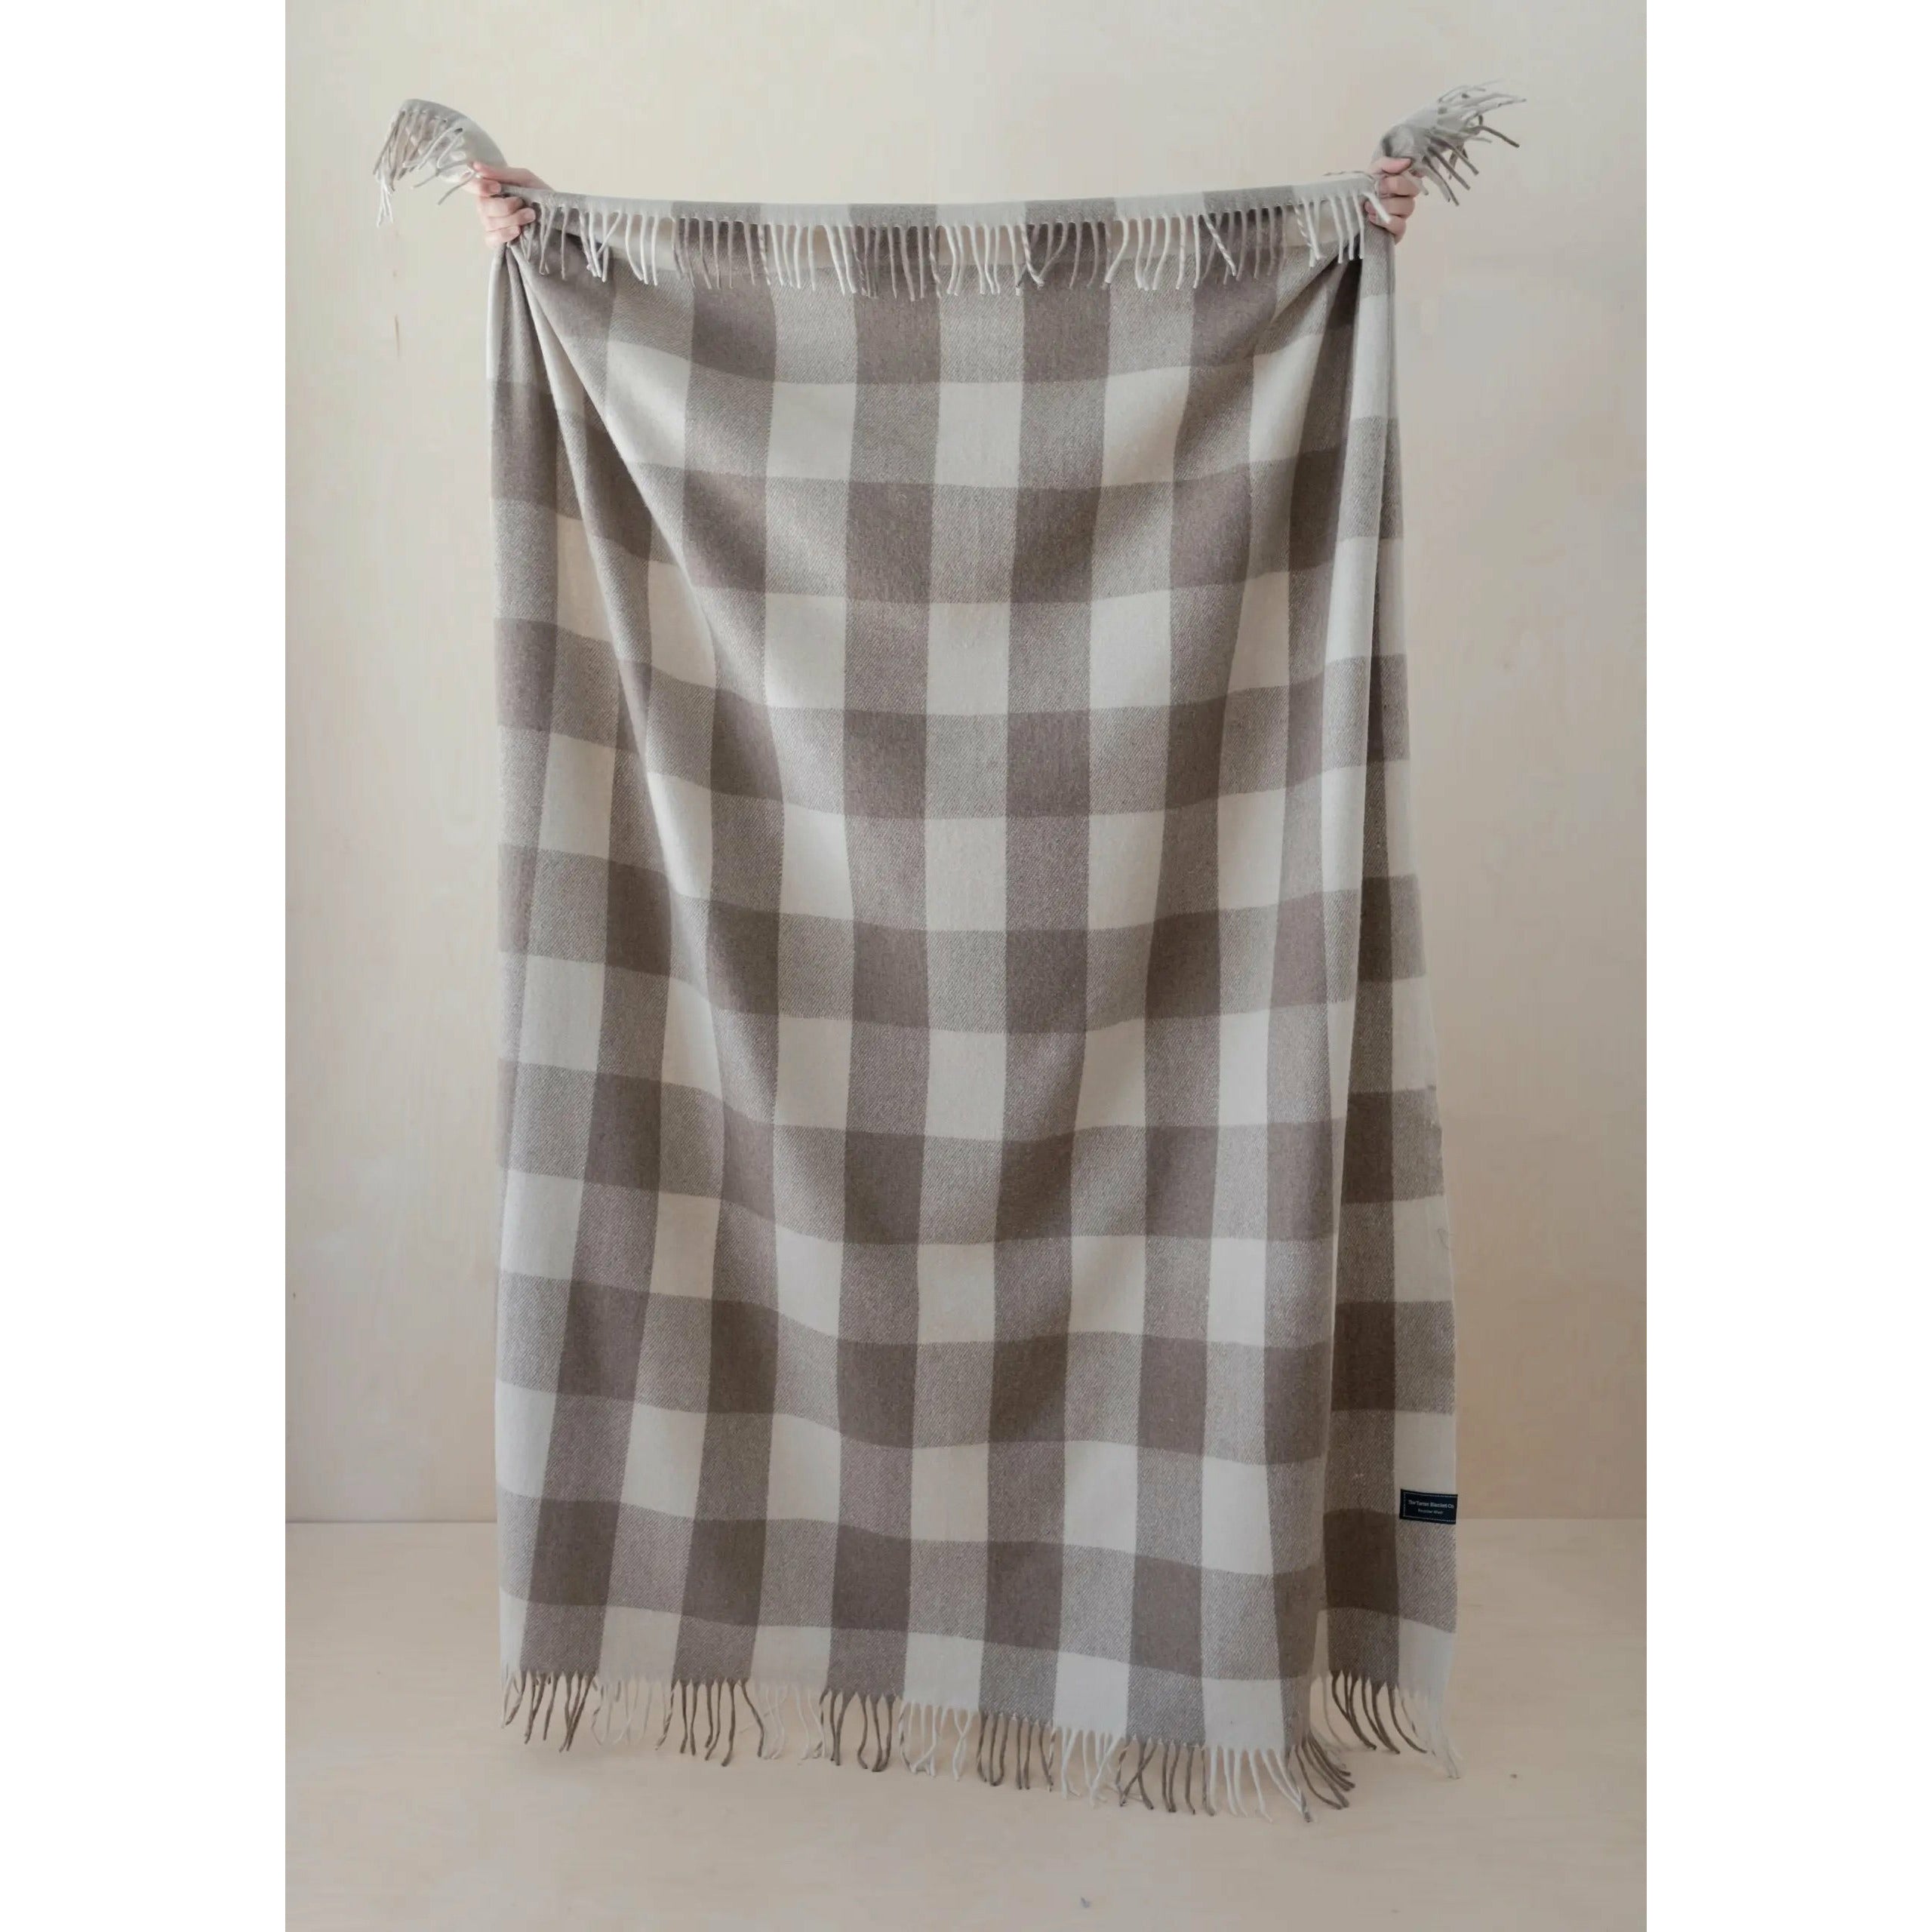 Neutral Cream Buffalo Check Blanket made from recycled wool and recycled fibres. Eco-friendly wool blanket that is machine washable. Tartan Blanket Co. Cream Buffalo Check Blanket. Jacob Tartan.